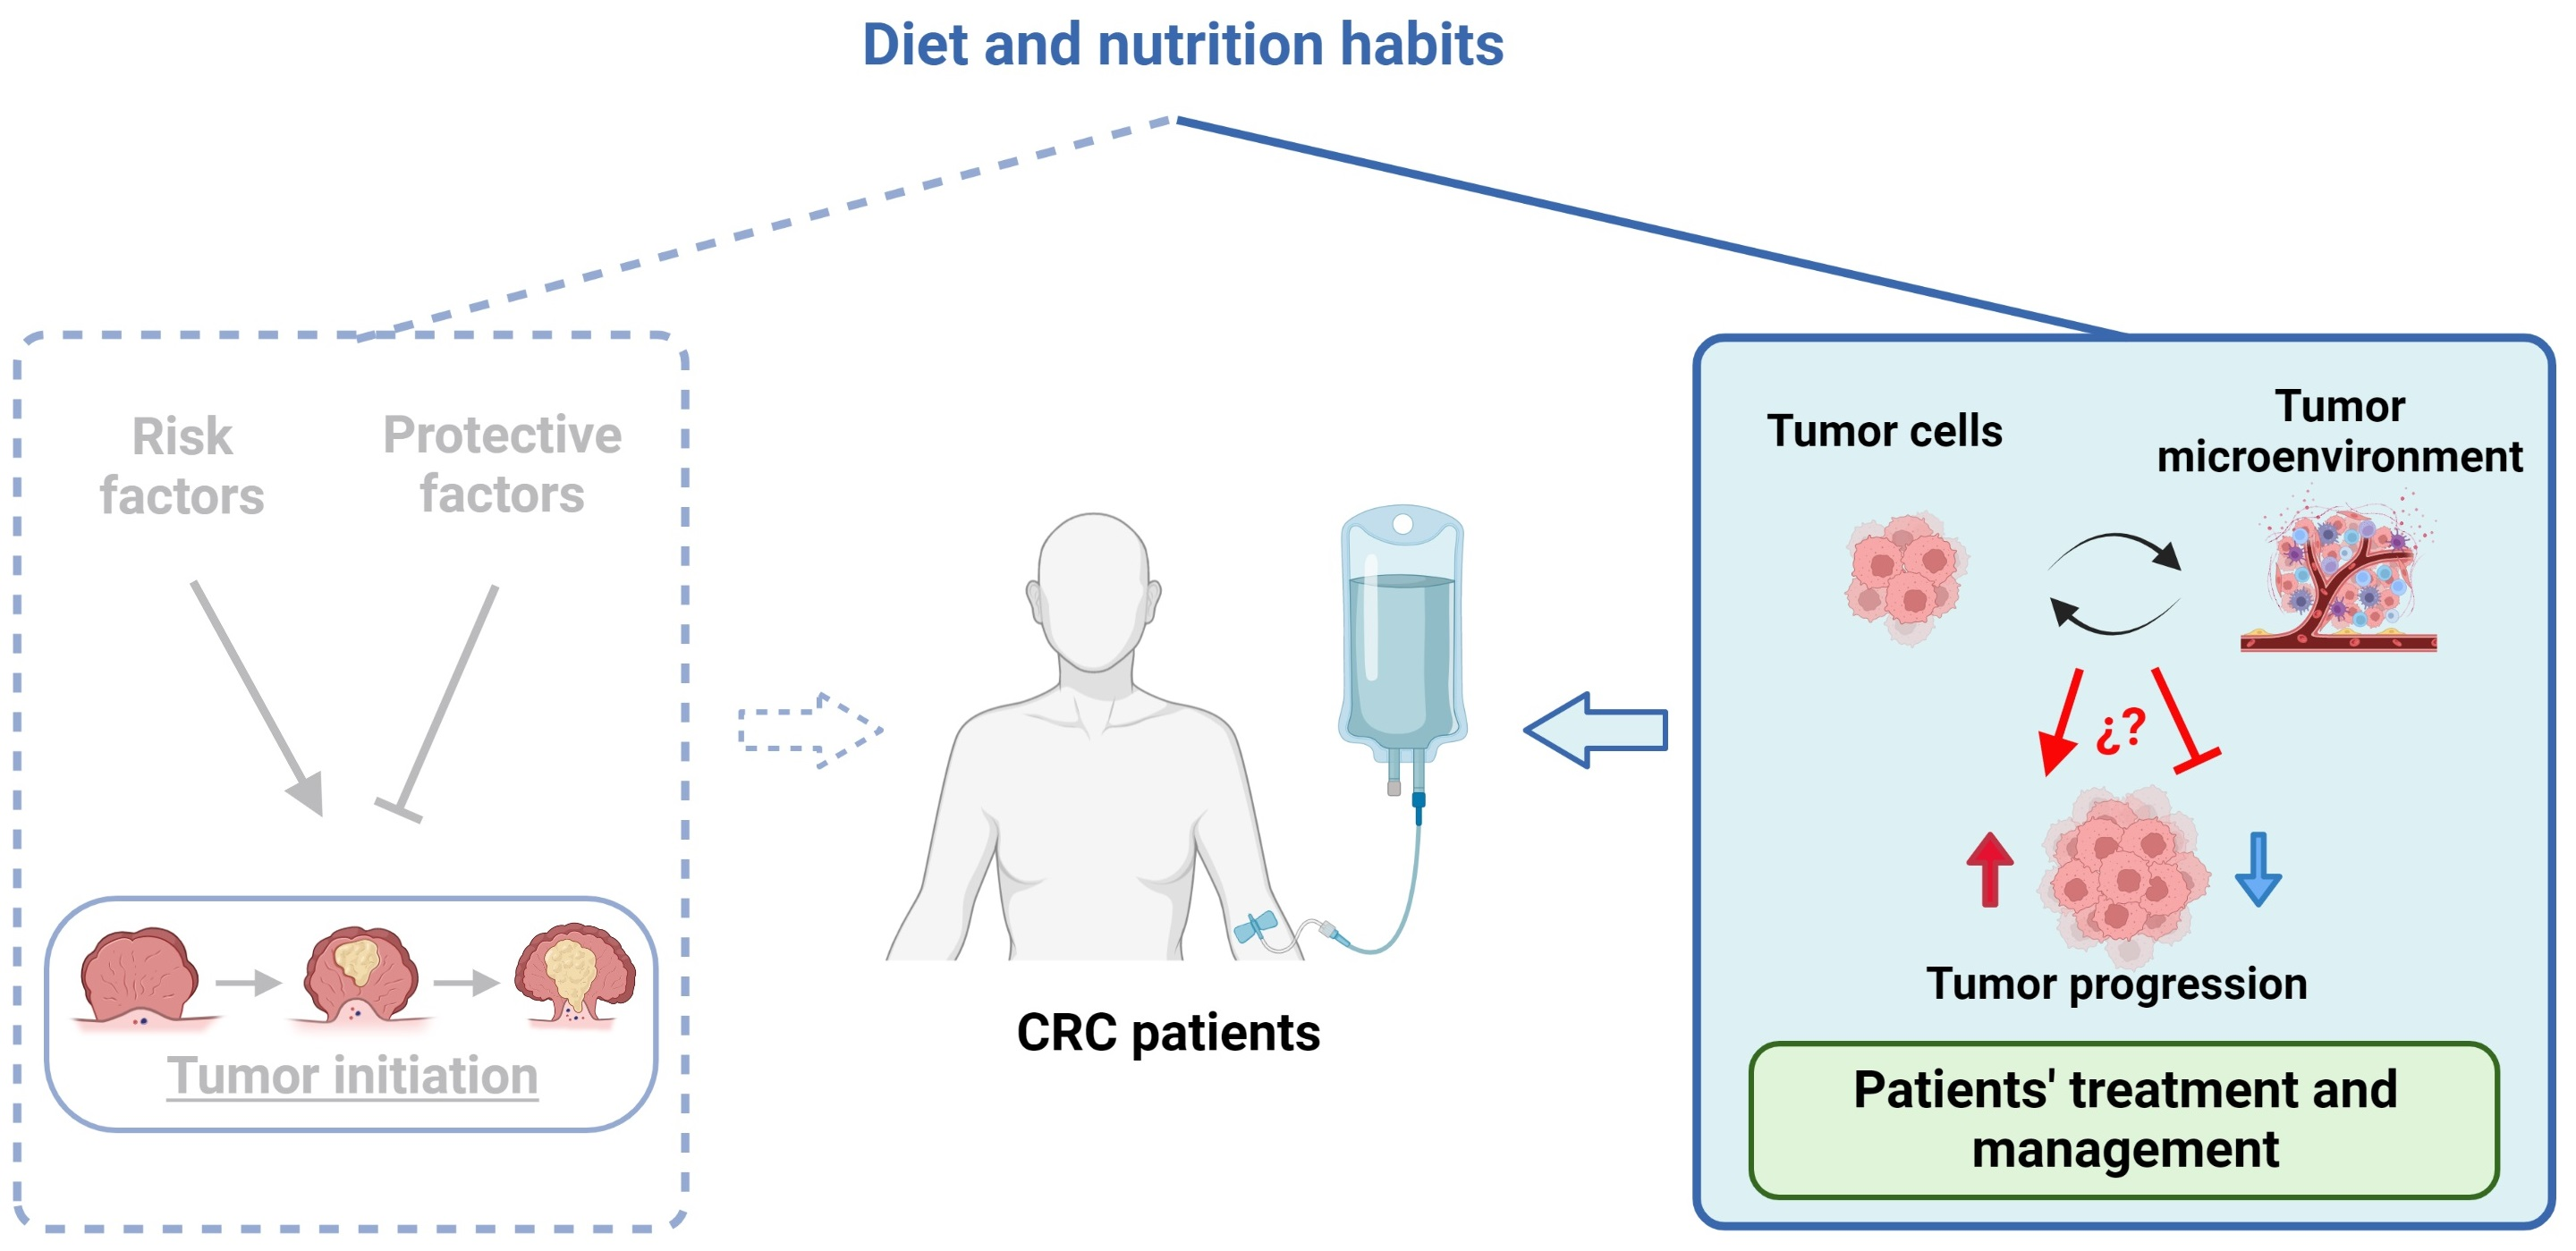 Dietary change starves cancer cells, overcoming treatment